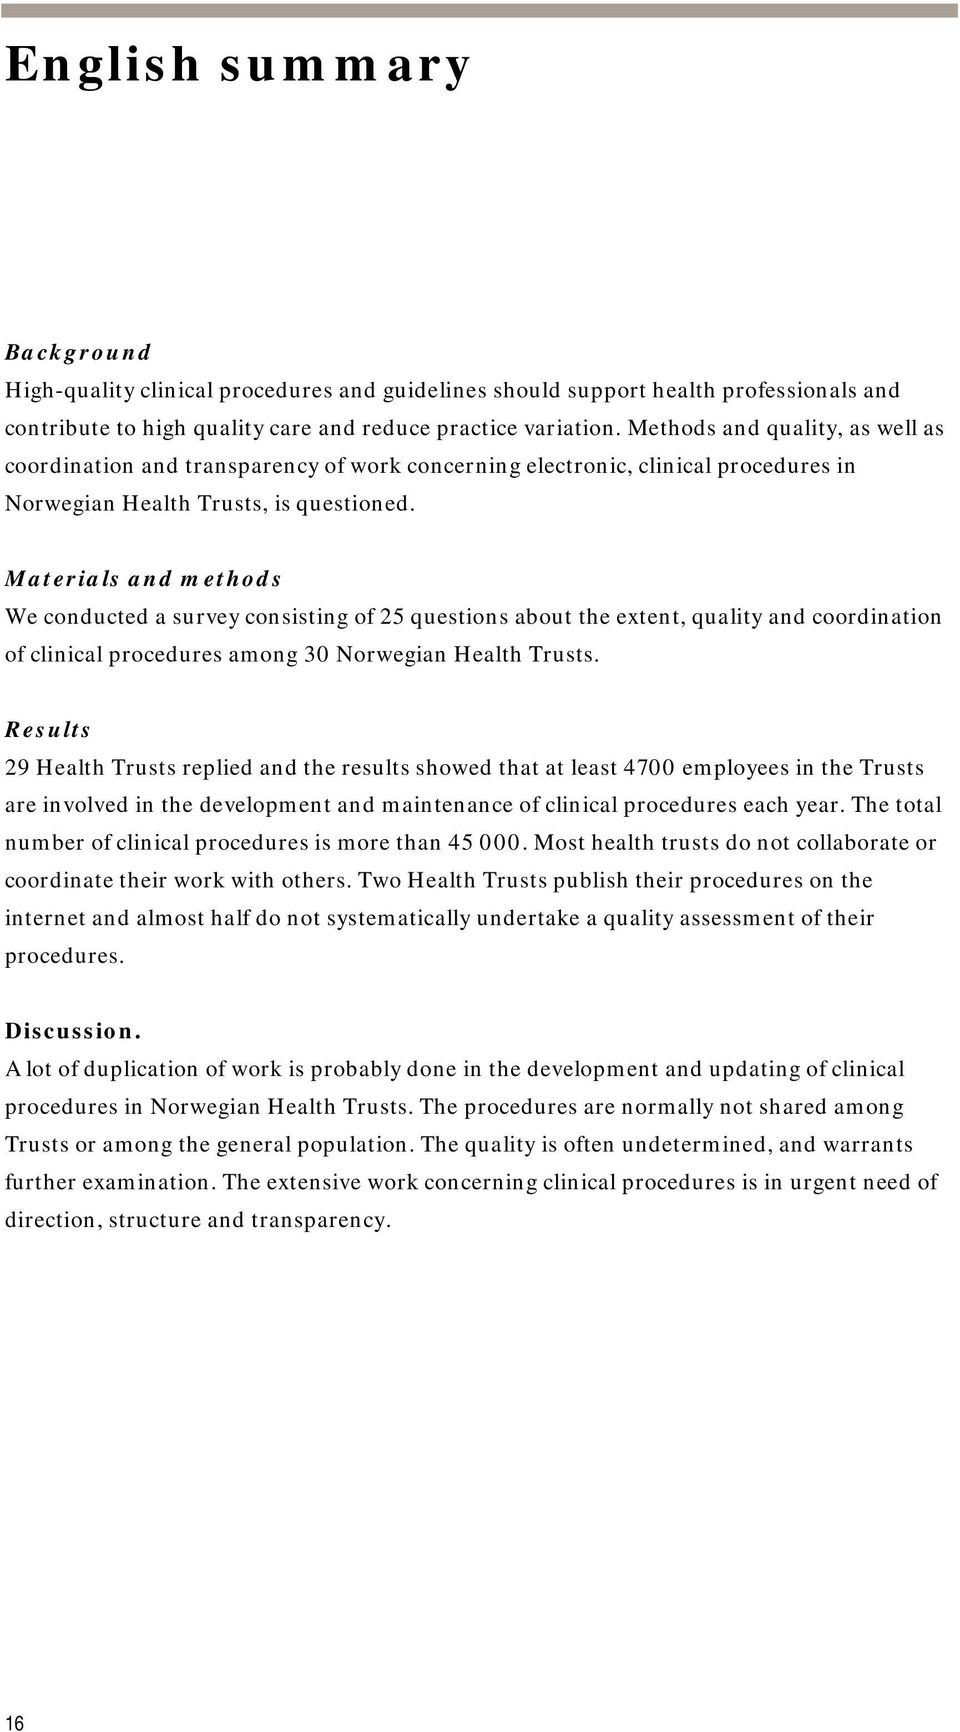 Materials and methods We conducted a survey consisting of 25 questions about the extent, quality and coordination of clinical procedures among 30 Norwegian Health Trusts.